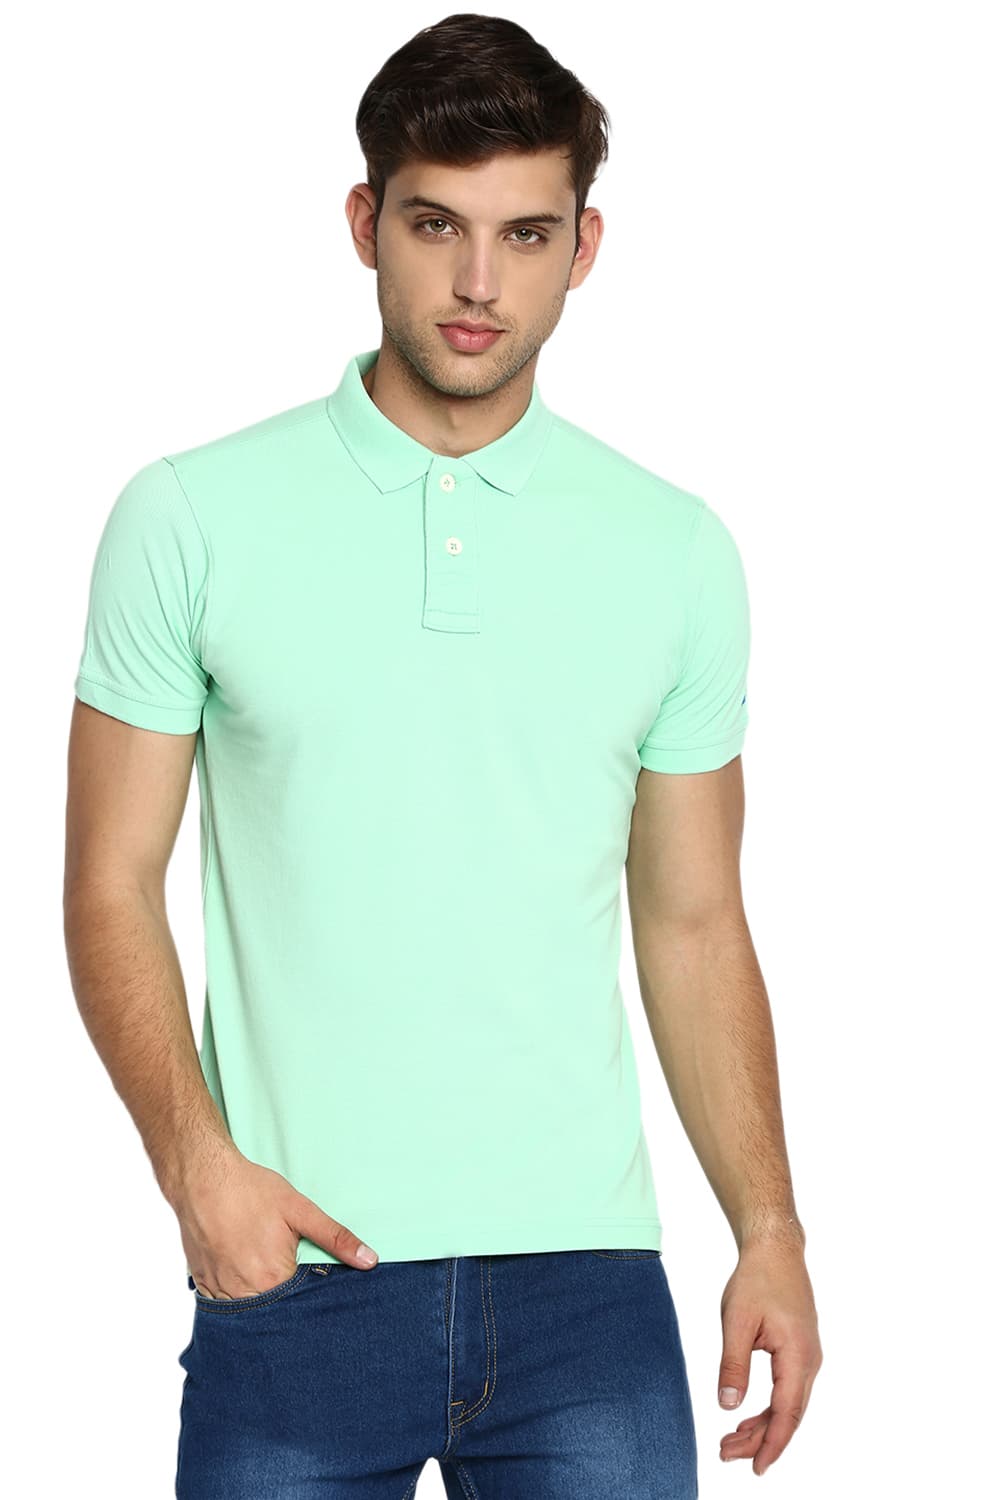 BASICS MUSCLE FIT POLO T SHIRT